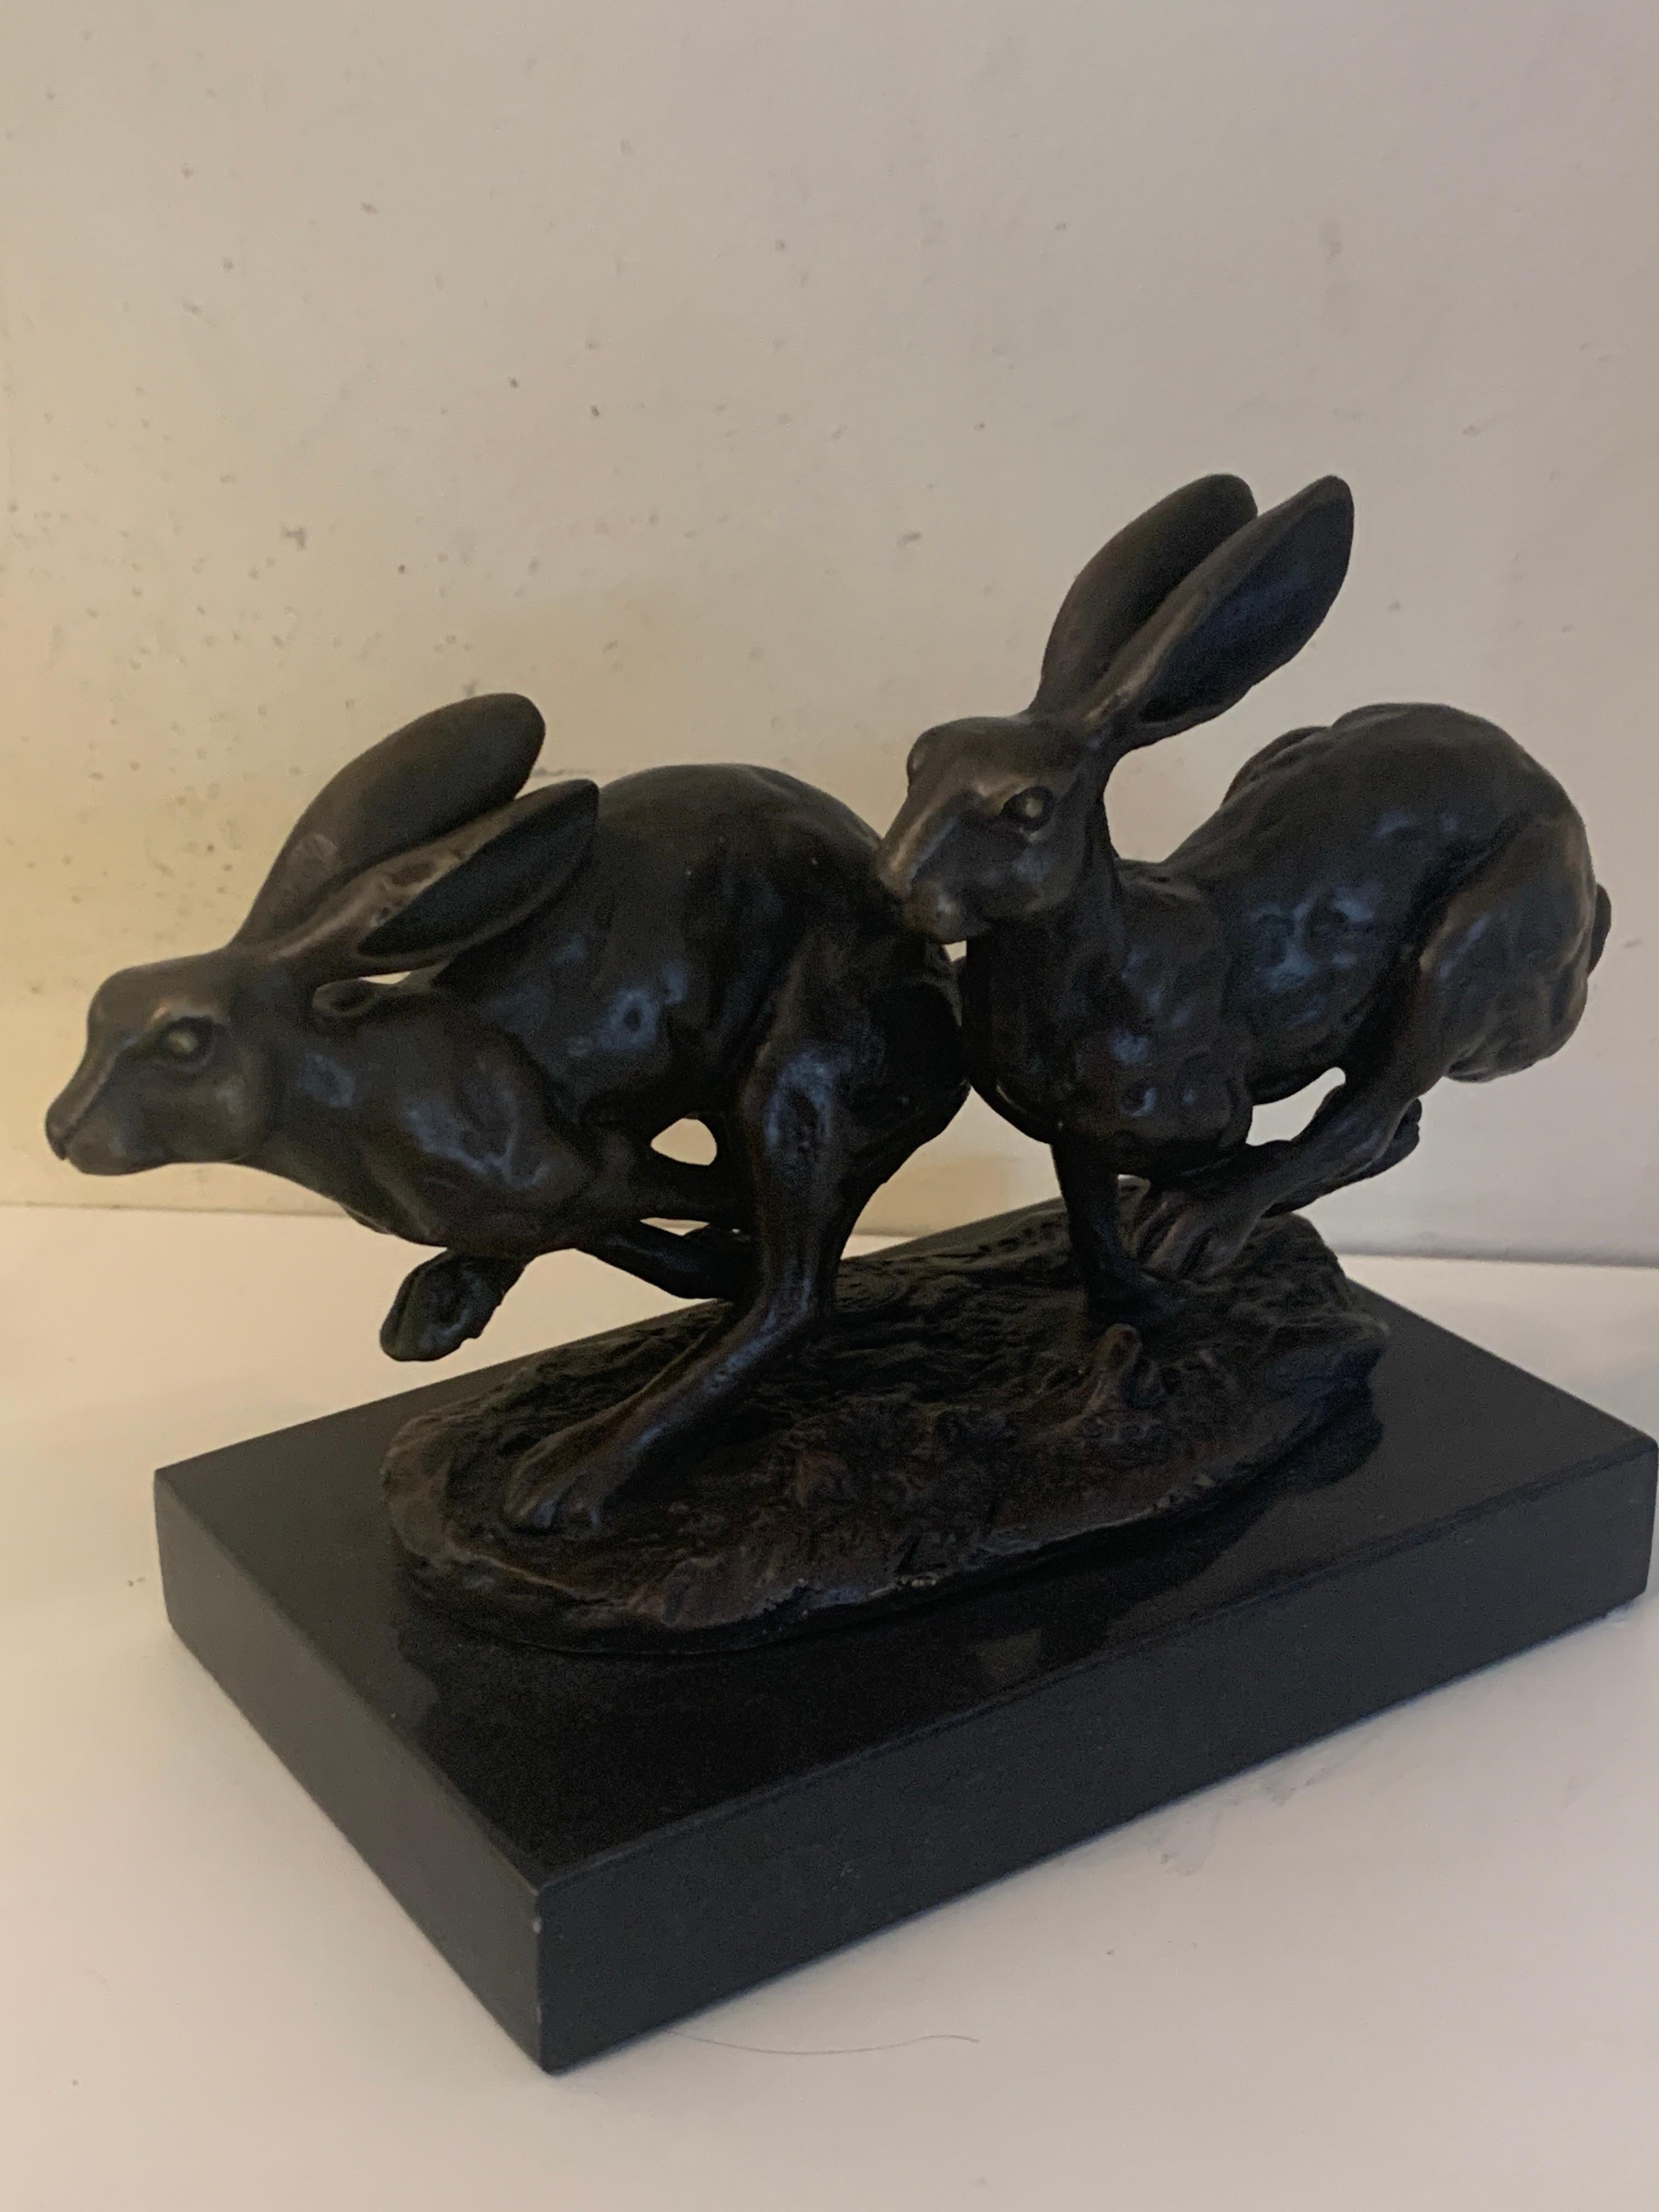 20th century French Bronze of two Hares Running, signed Nick with Paris seal 2